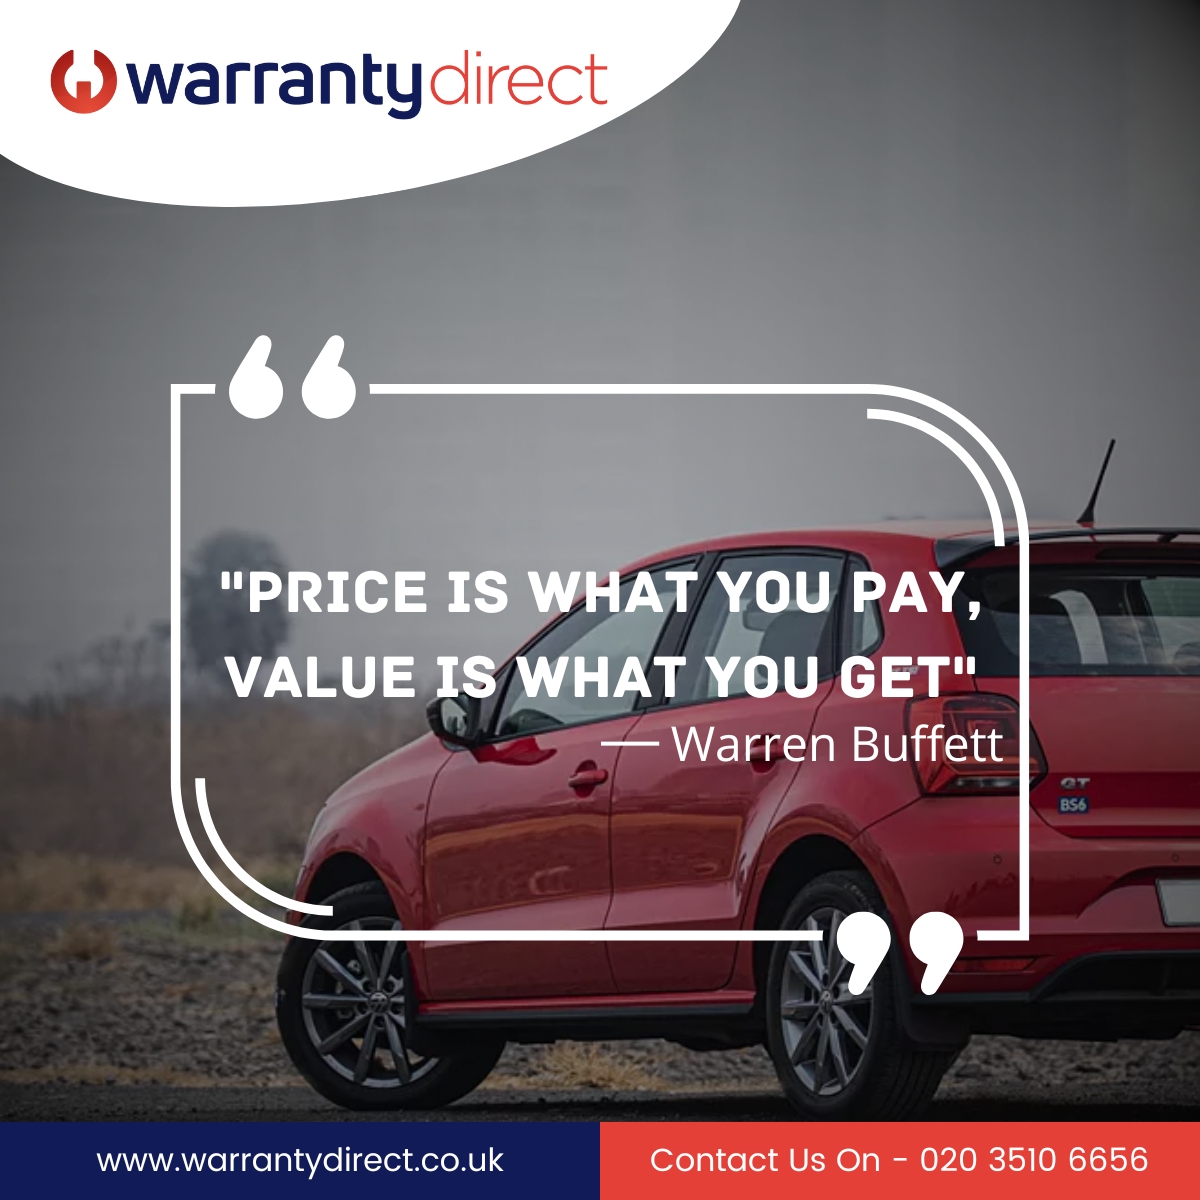 Warren Buffett reminds us that true value goes beyond cost. With Warranty Direct, you’re not just paying for a service; you’re investing in the value of dependable coverage and unparalleled peace of mind. #warrenbuffett #warrantydirect #carwarranty #mondays #uk #usedcar #cars